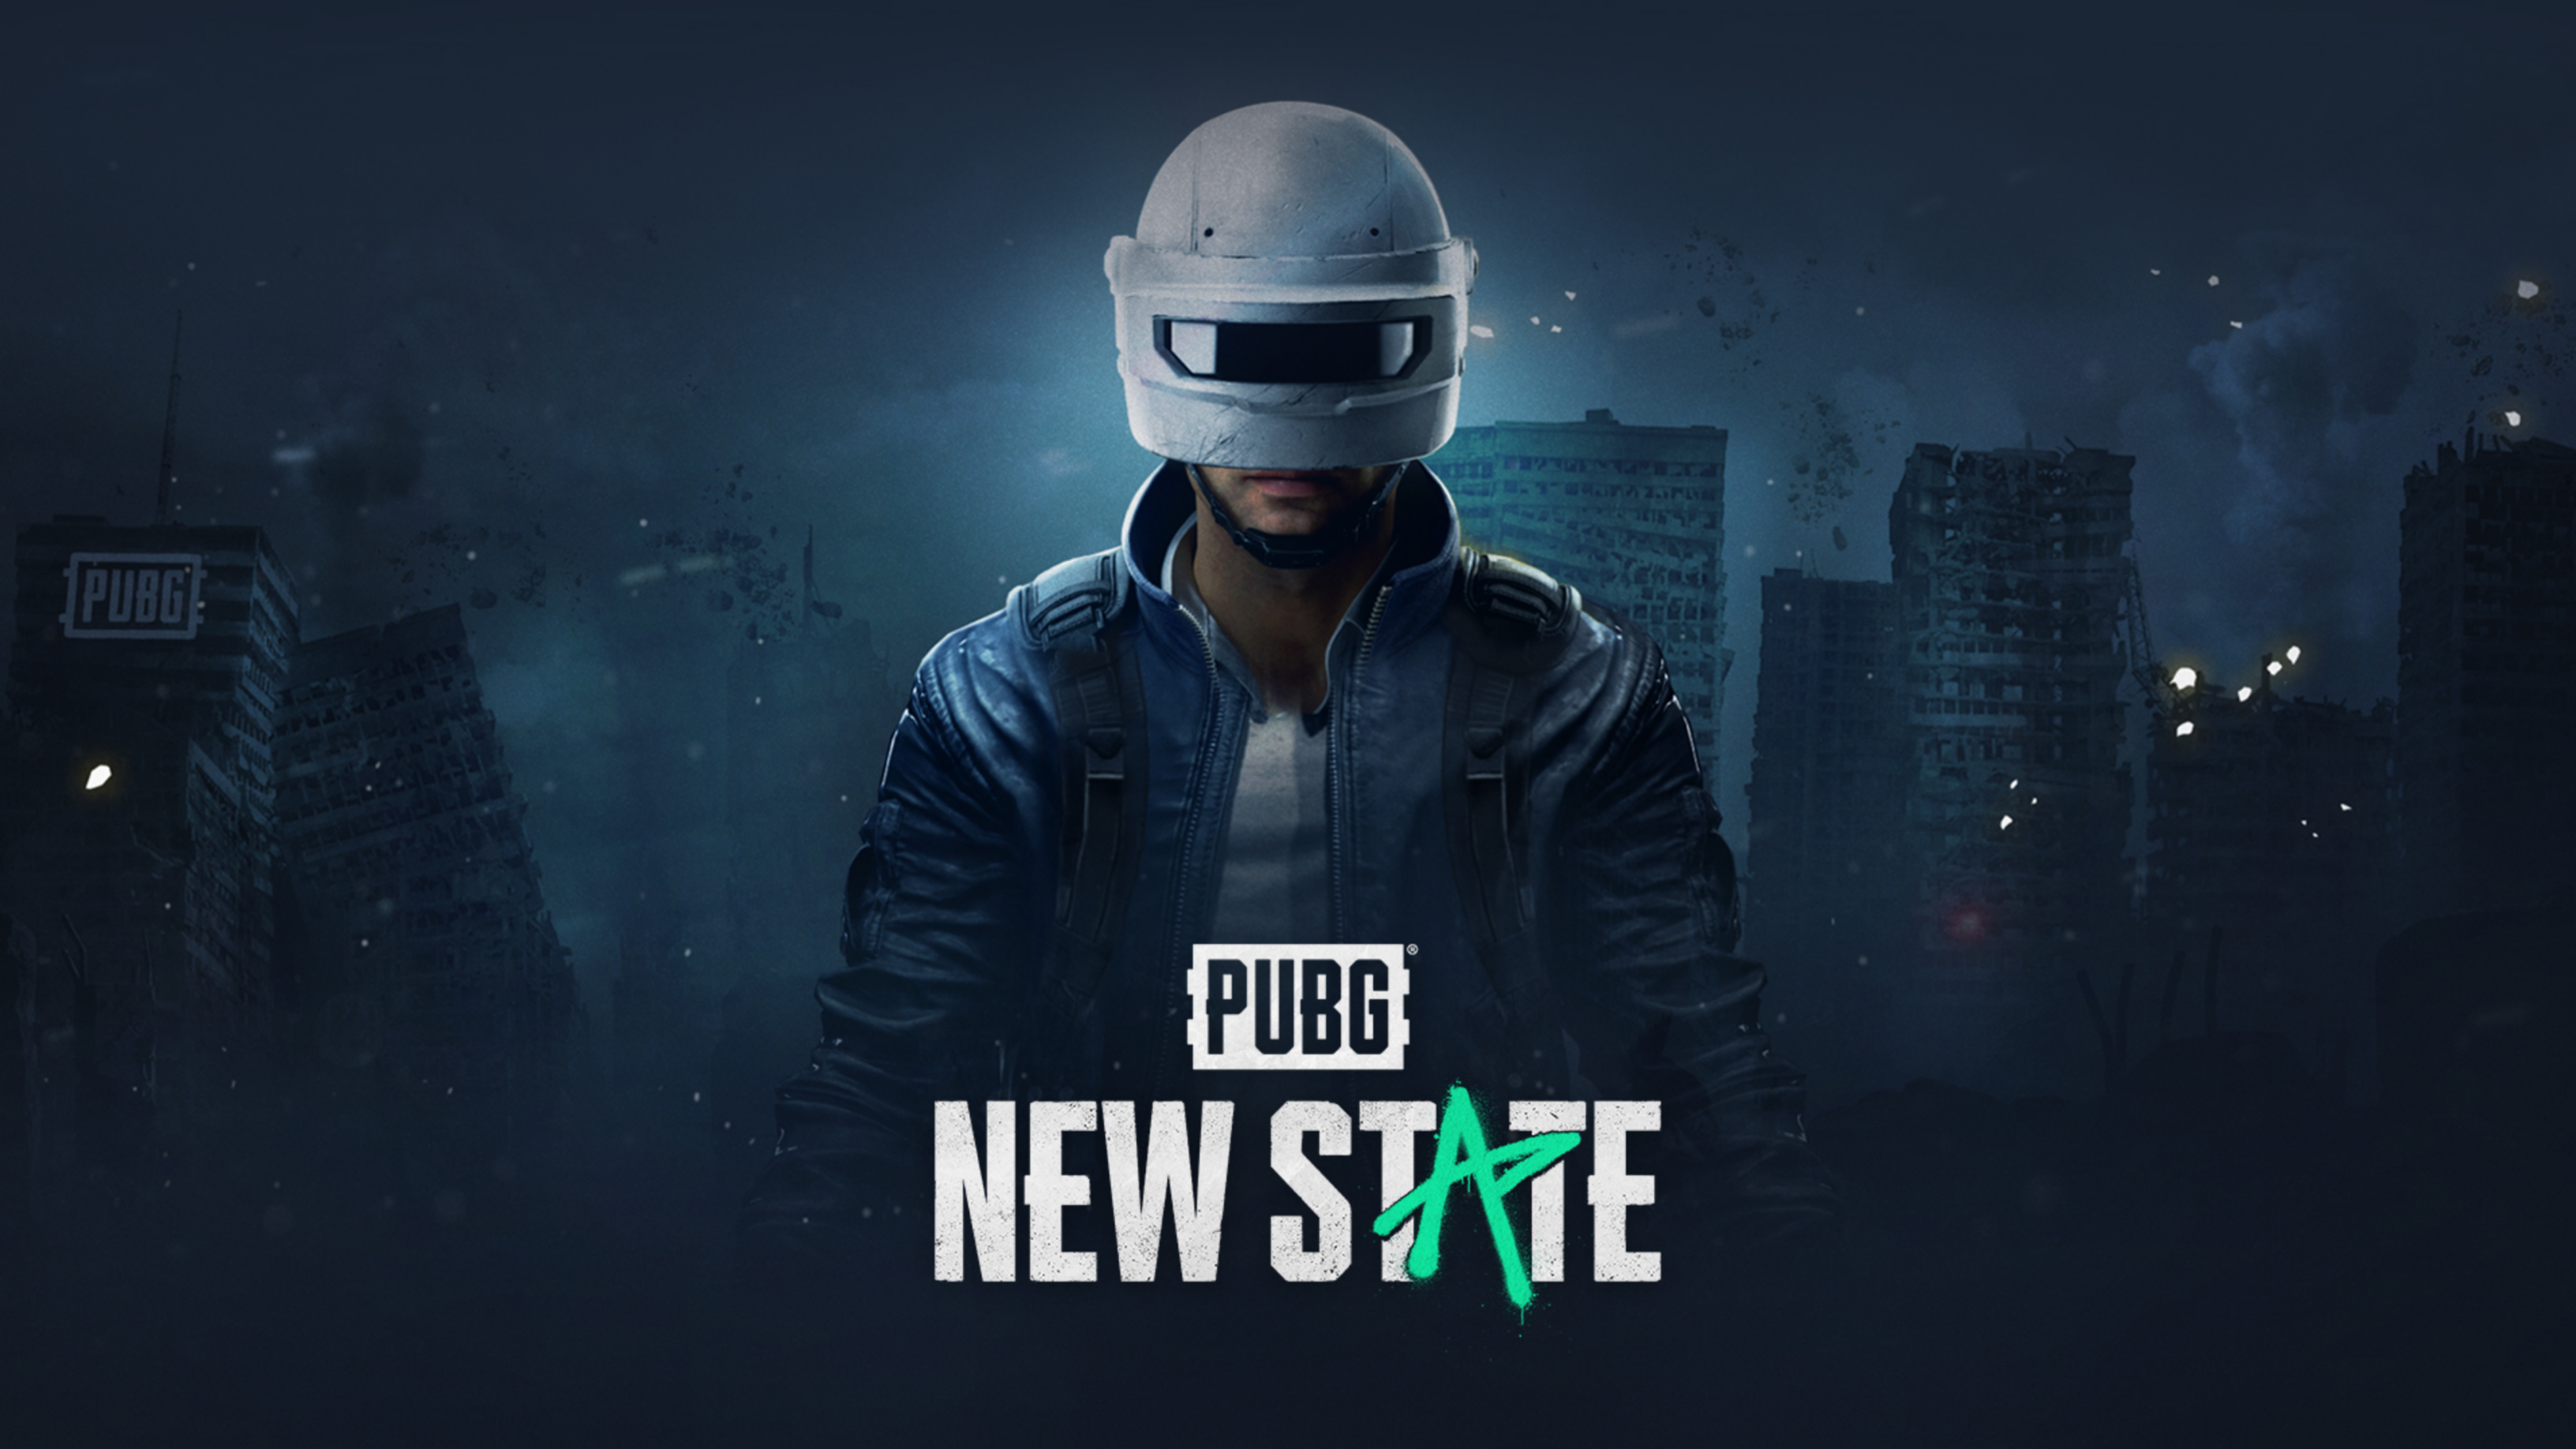 General 3264x1836 PUBG PUBG: New State PC gaming video game art collapsed building helmet jacket